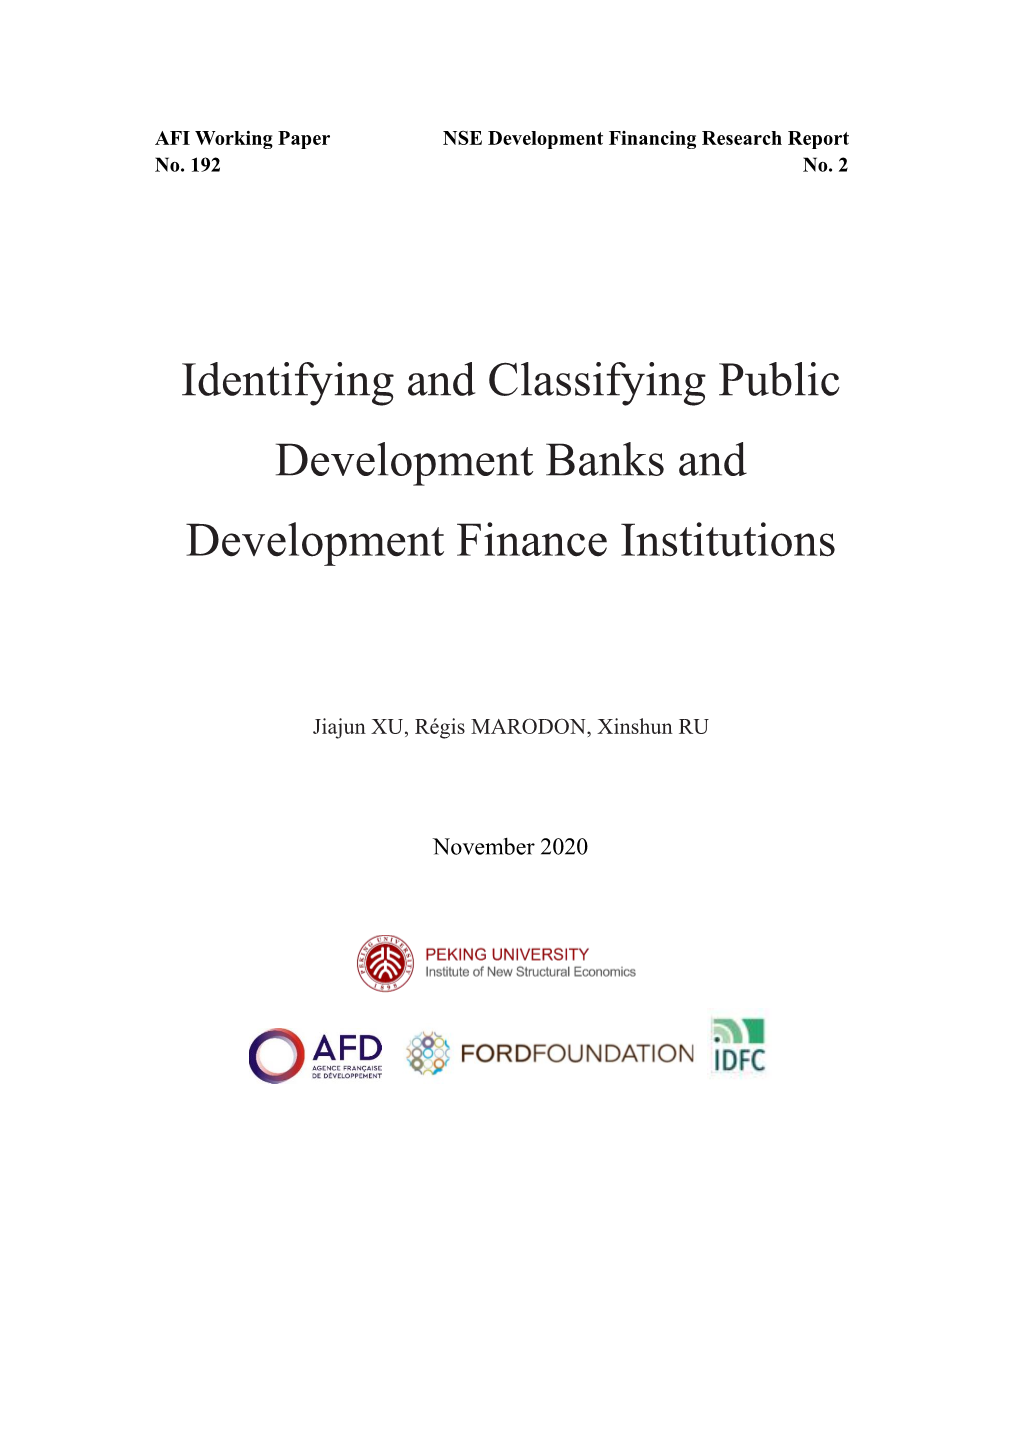 Identifying and Classifying Public Development Banks and Development Finance Institutions